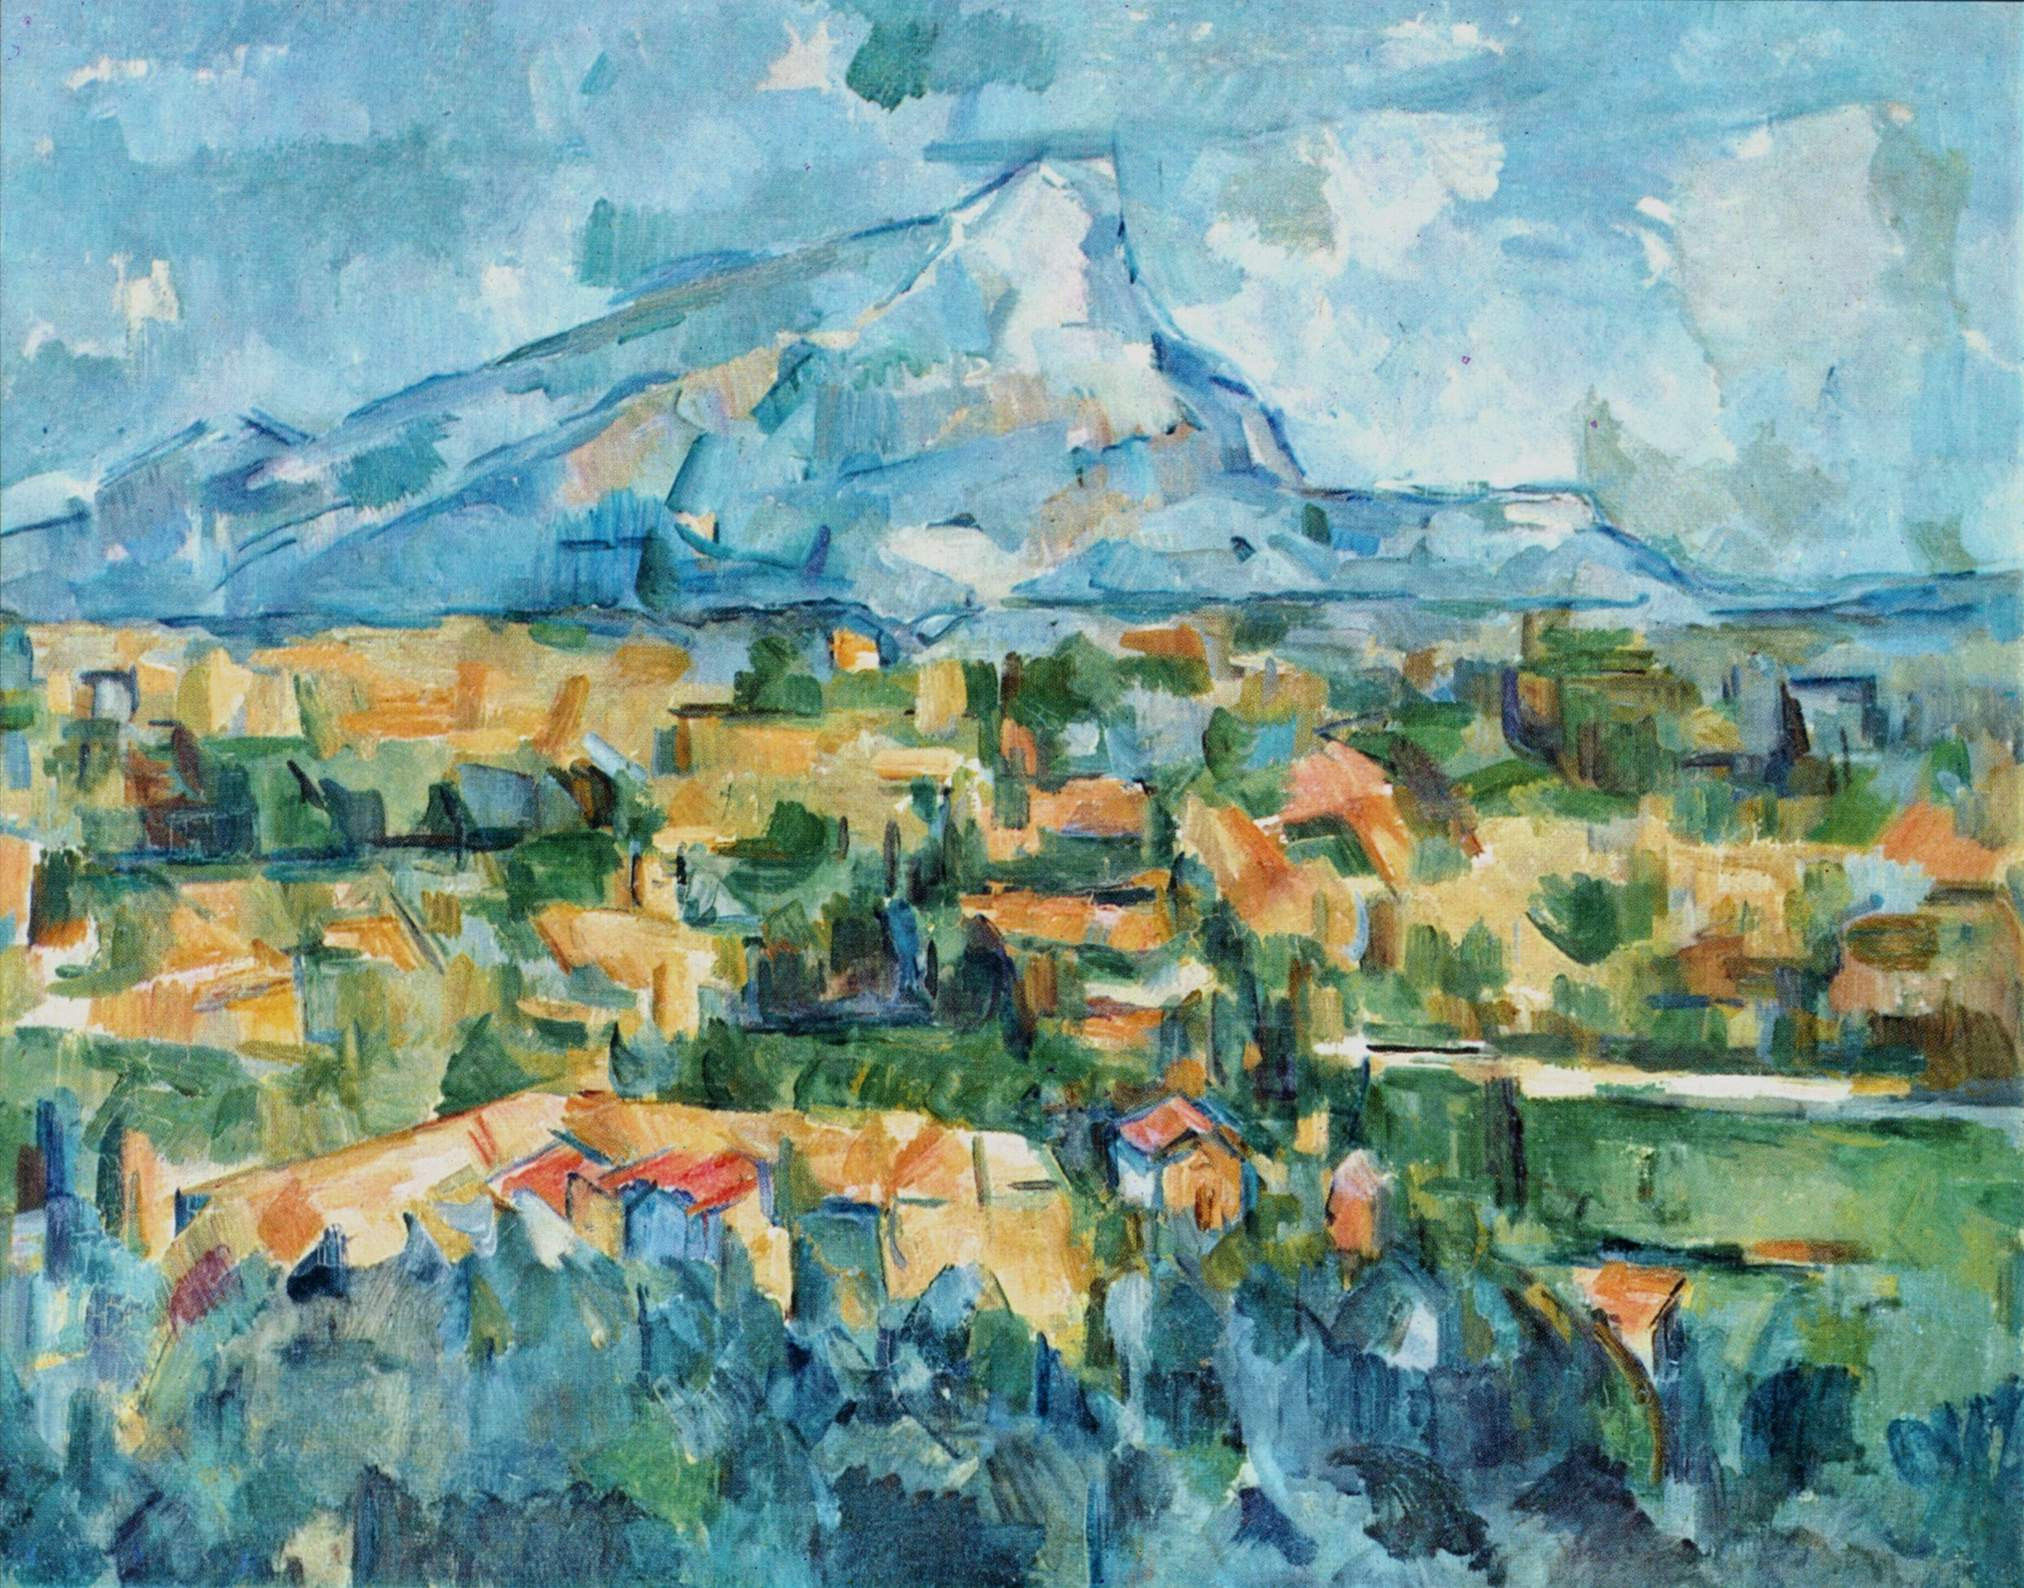  Abstract painting by Paul Cezanne from 1904, Montagne Sainte-Victoire